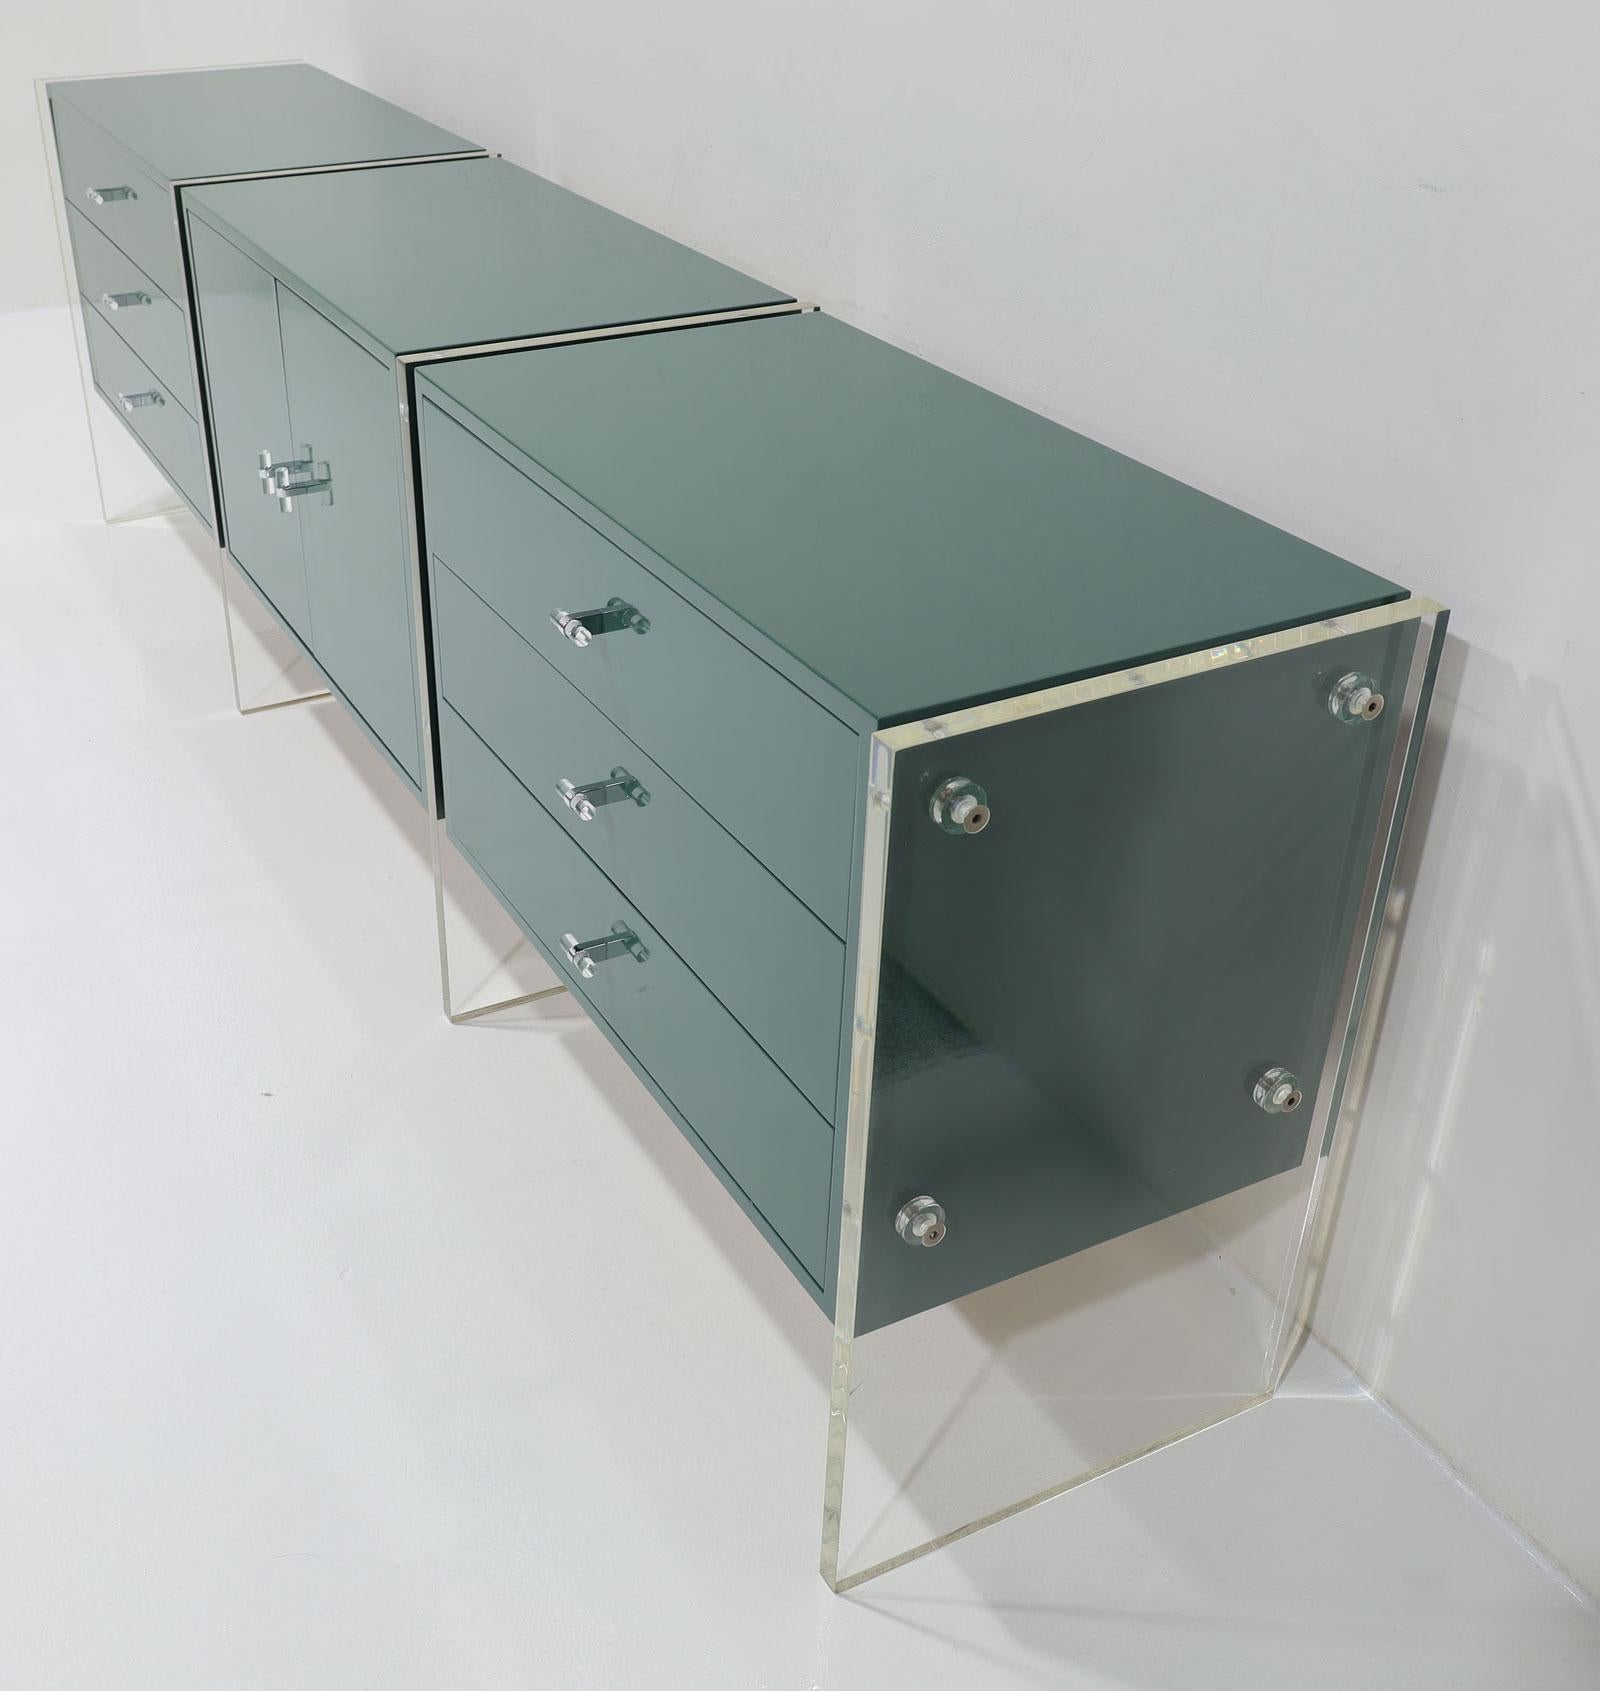 20th Century Three Section Mid Century Sideboard with Lucite Legs and Knobs in Green Lacquer For Sale